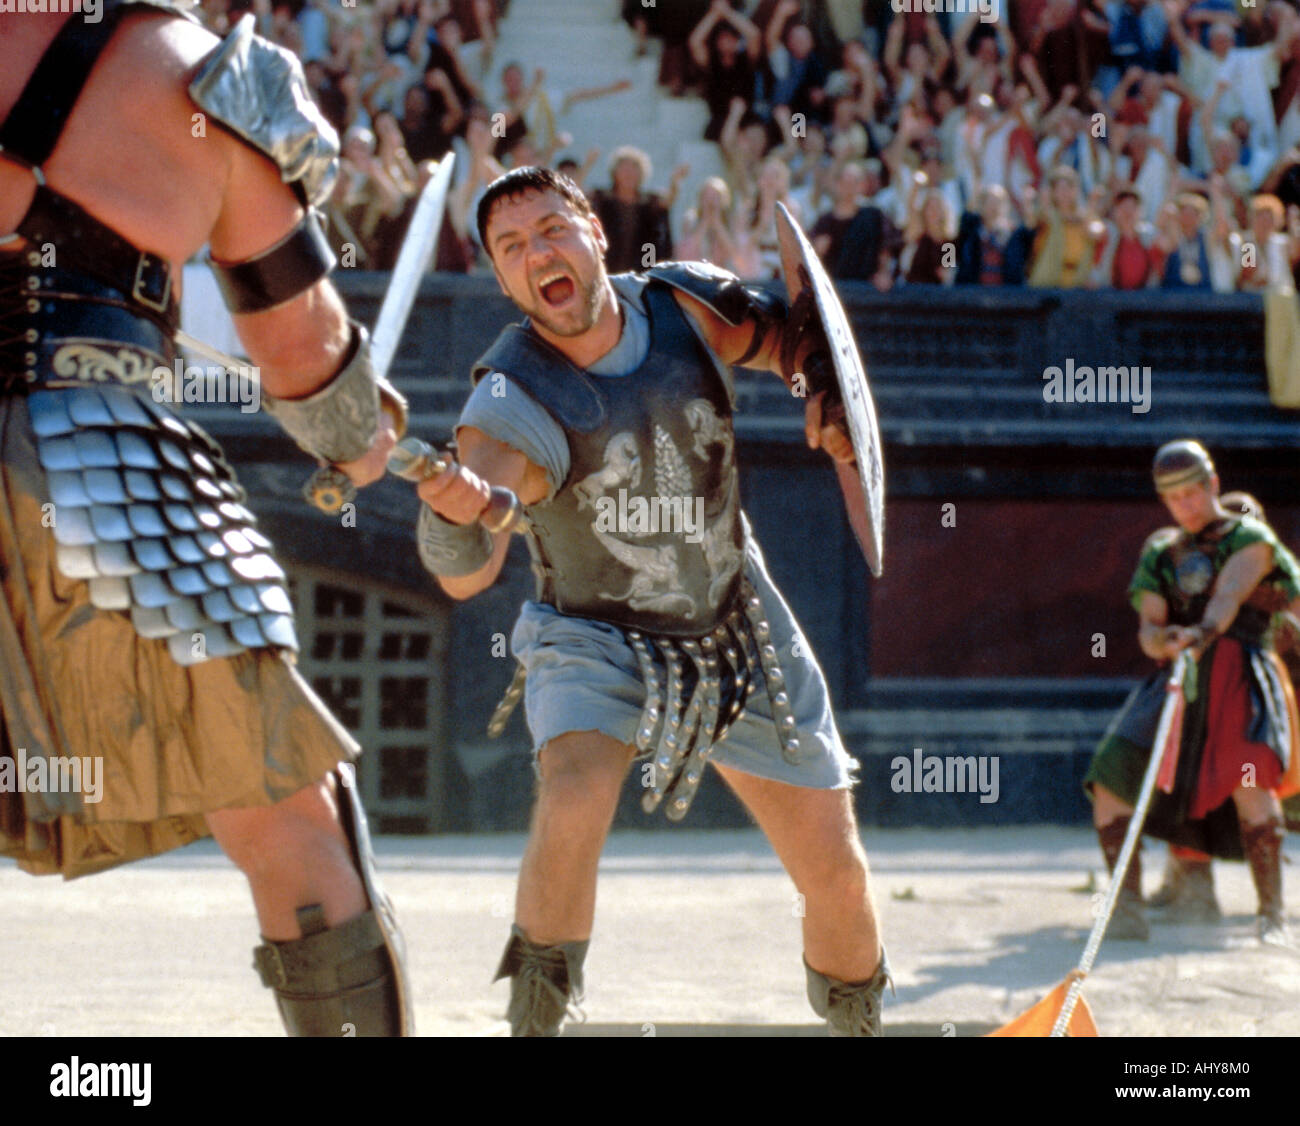 GLADIATOR 2000 film universale con Russell Crowe Foto Stock